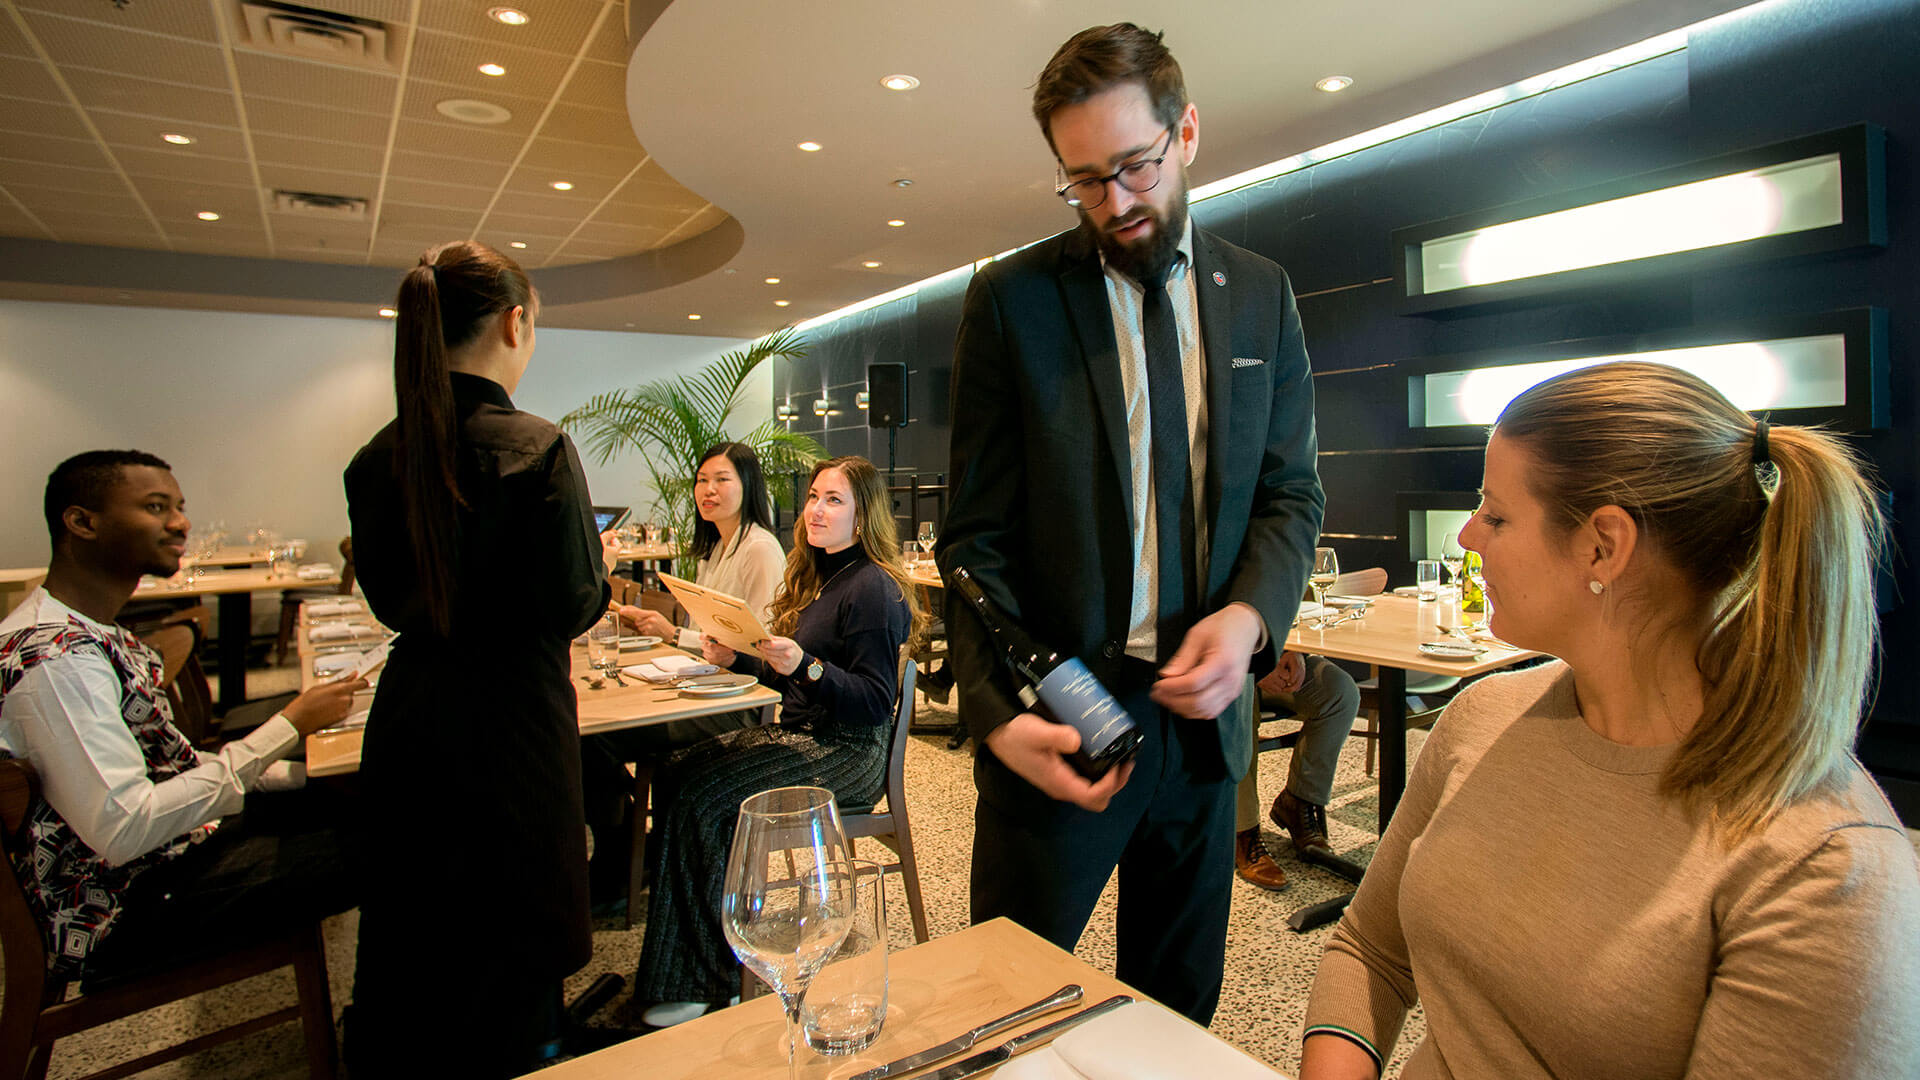 A waiter attending to guests at a college-run restaurant, enhancing the educational ambiance with practical service experience.